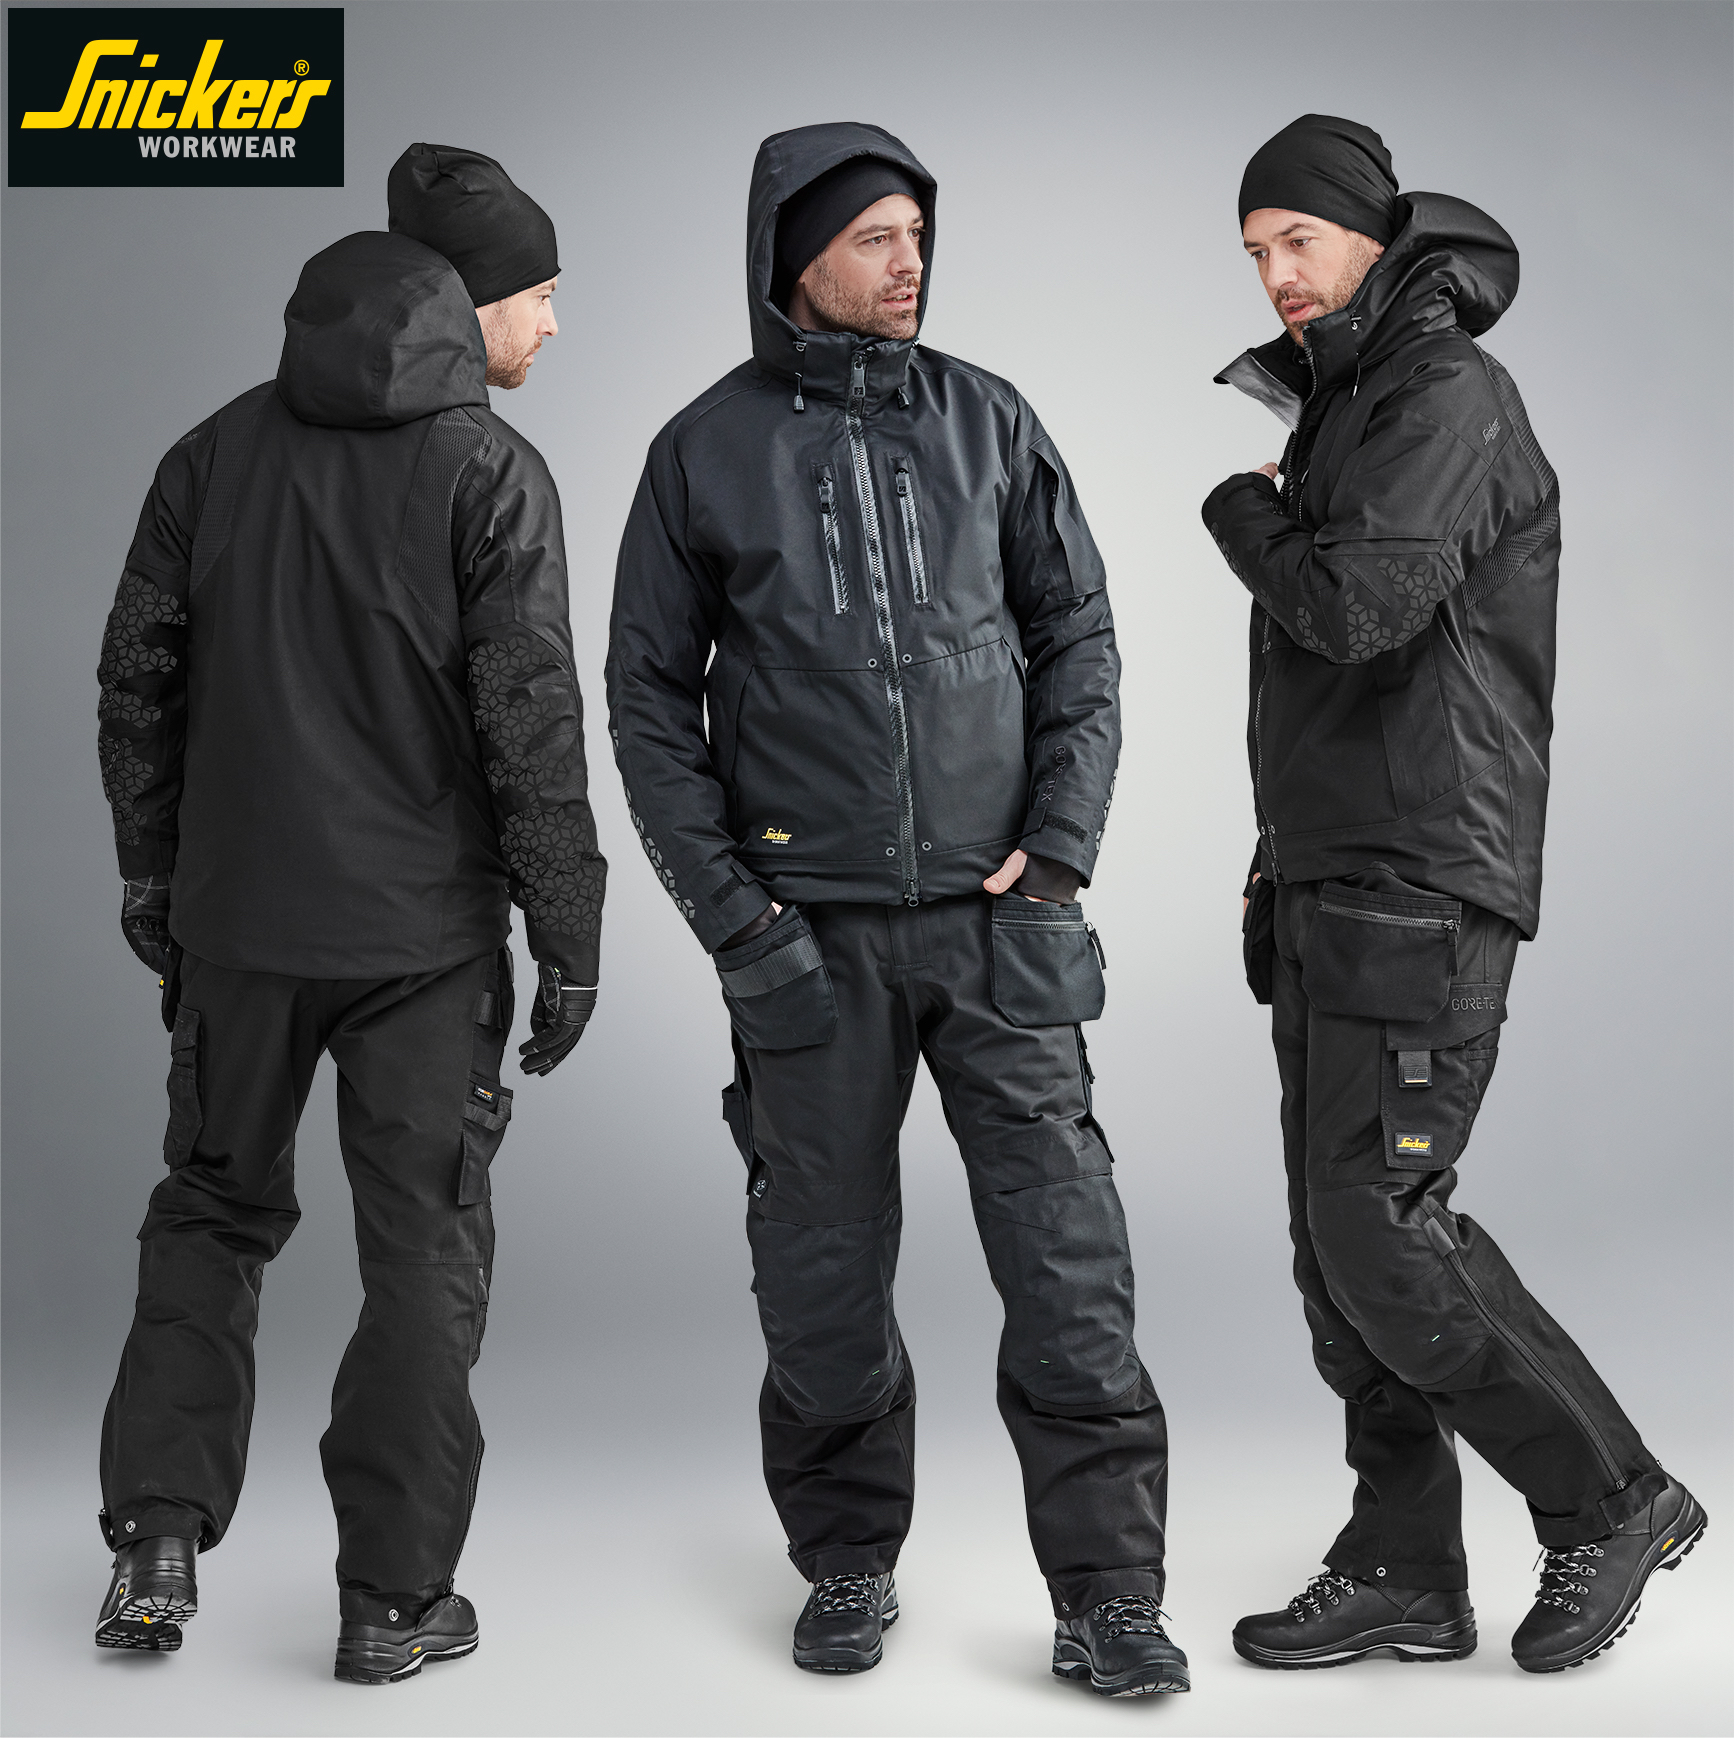 Snickers Workwear Flexiwork Insulated Jackets and Trousers - Clearview  Magazine